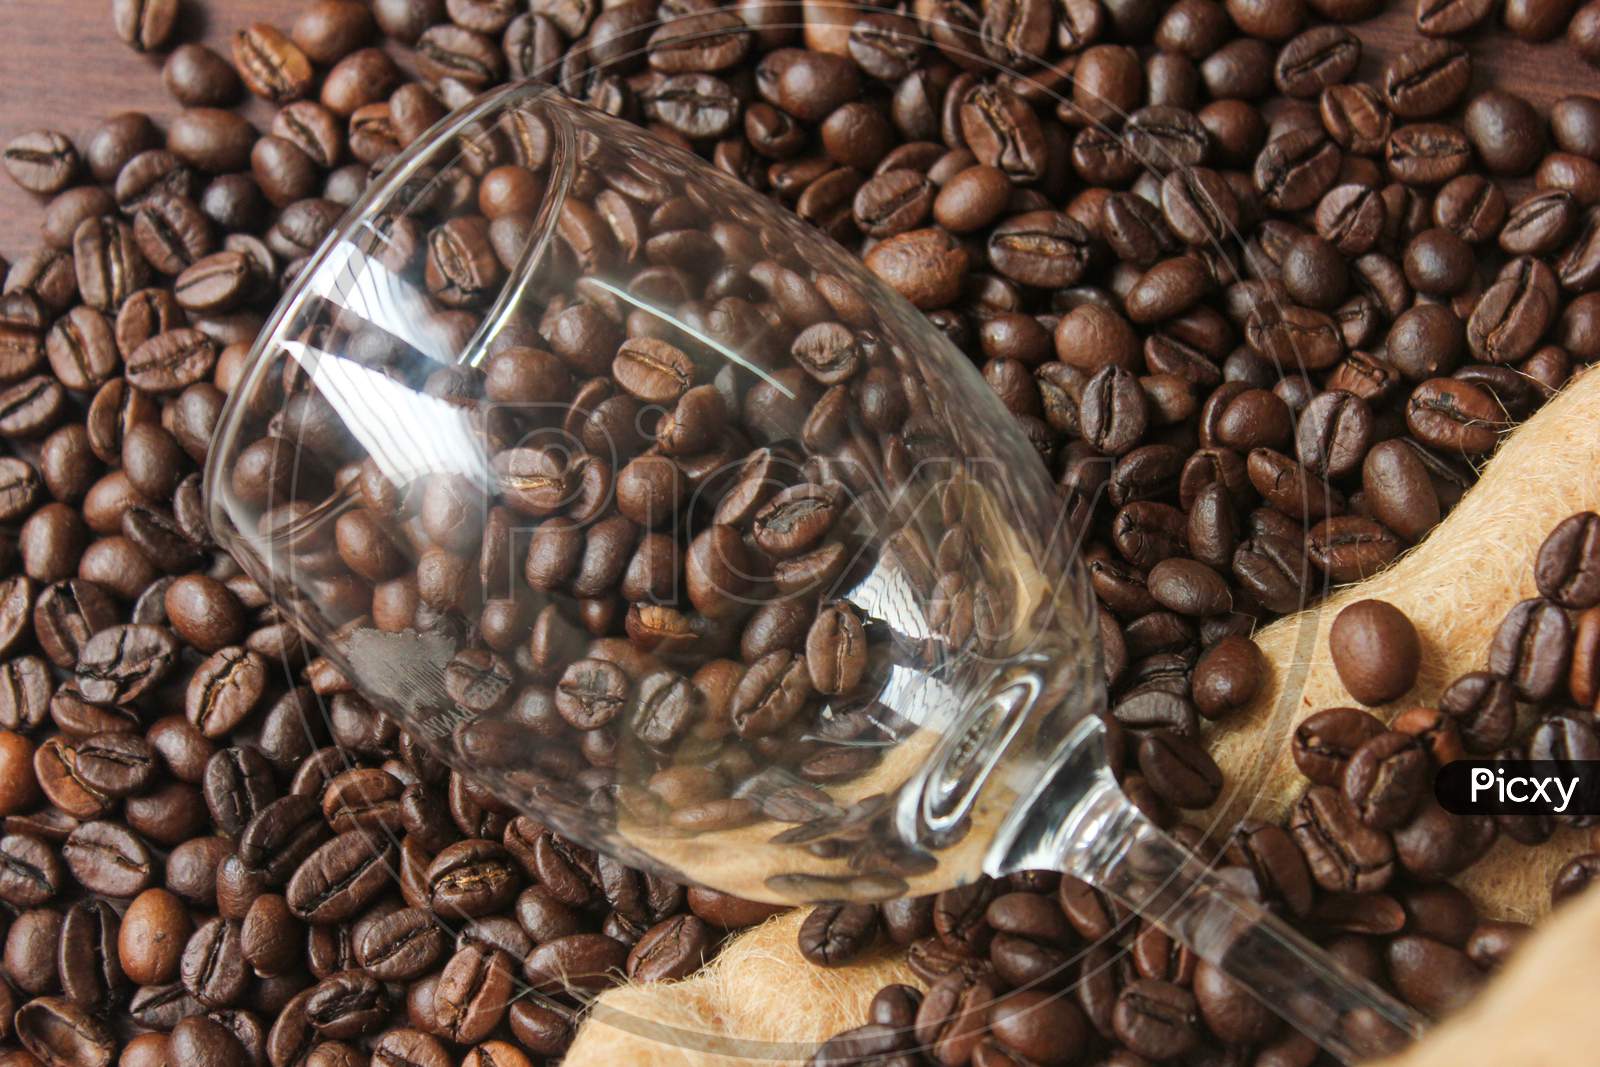 A Glass On Top Of The Coffee Bean